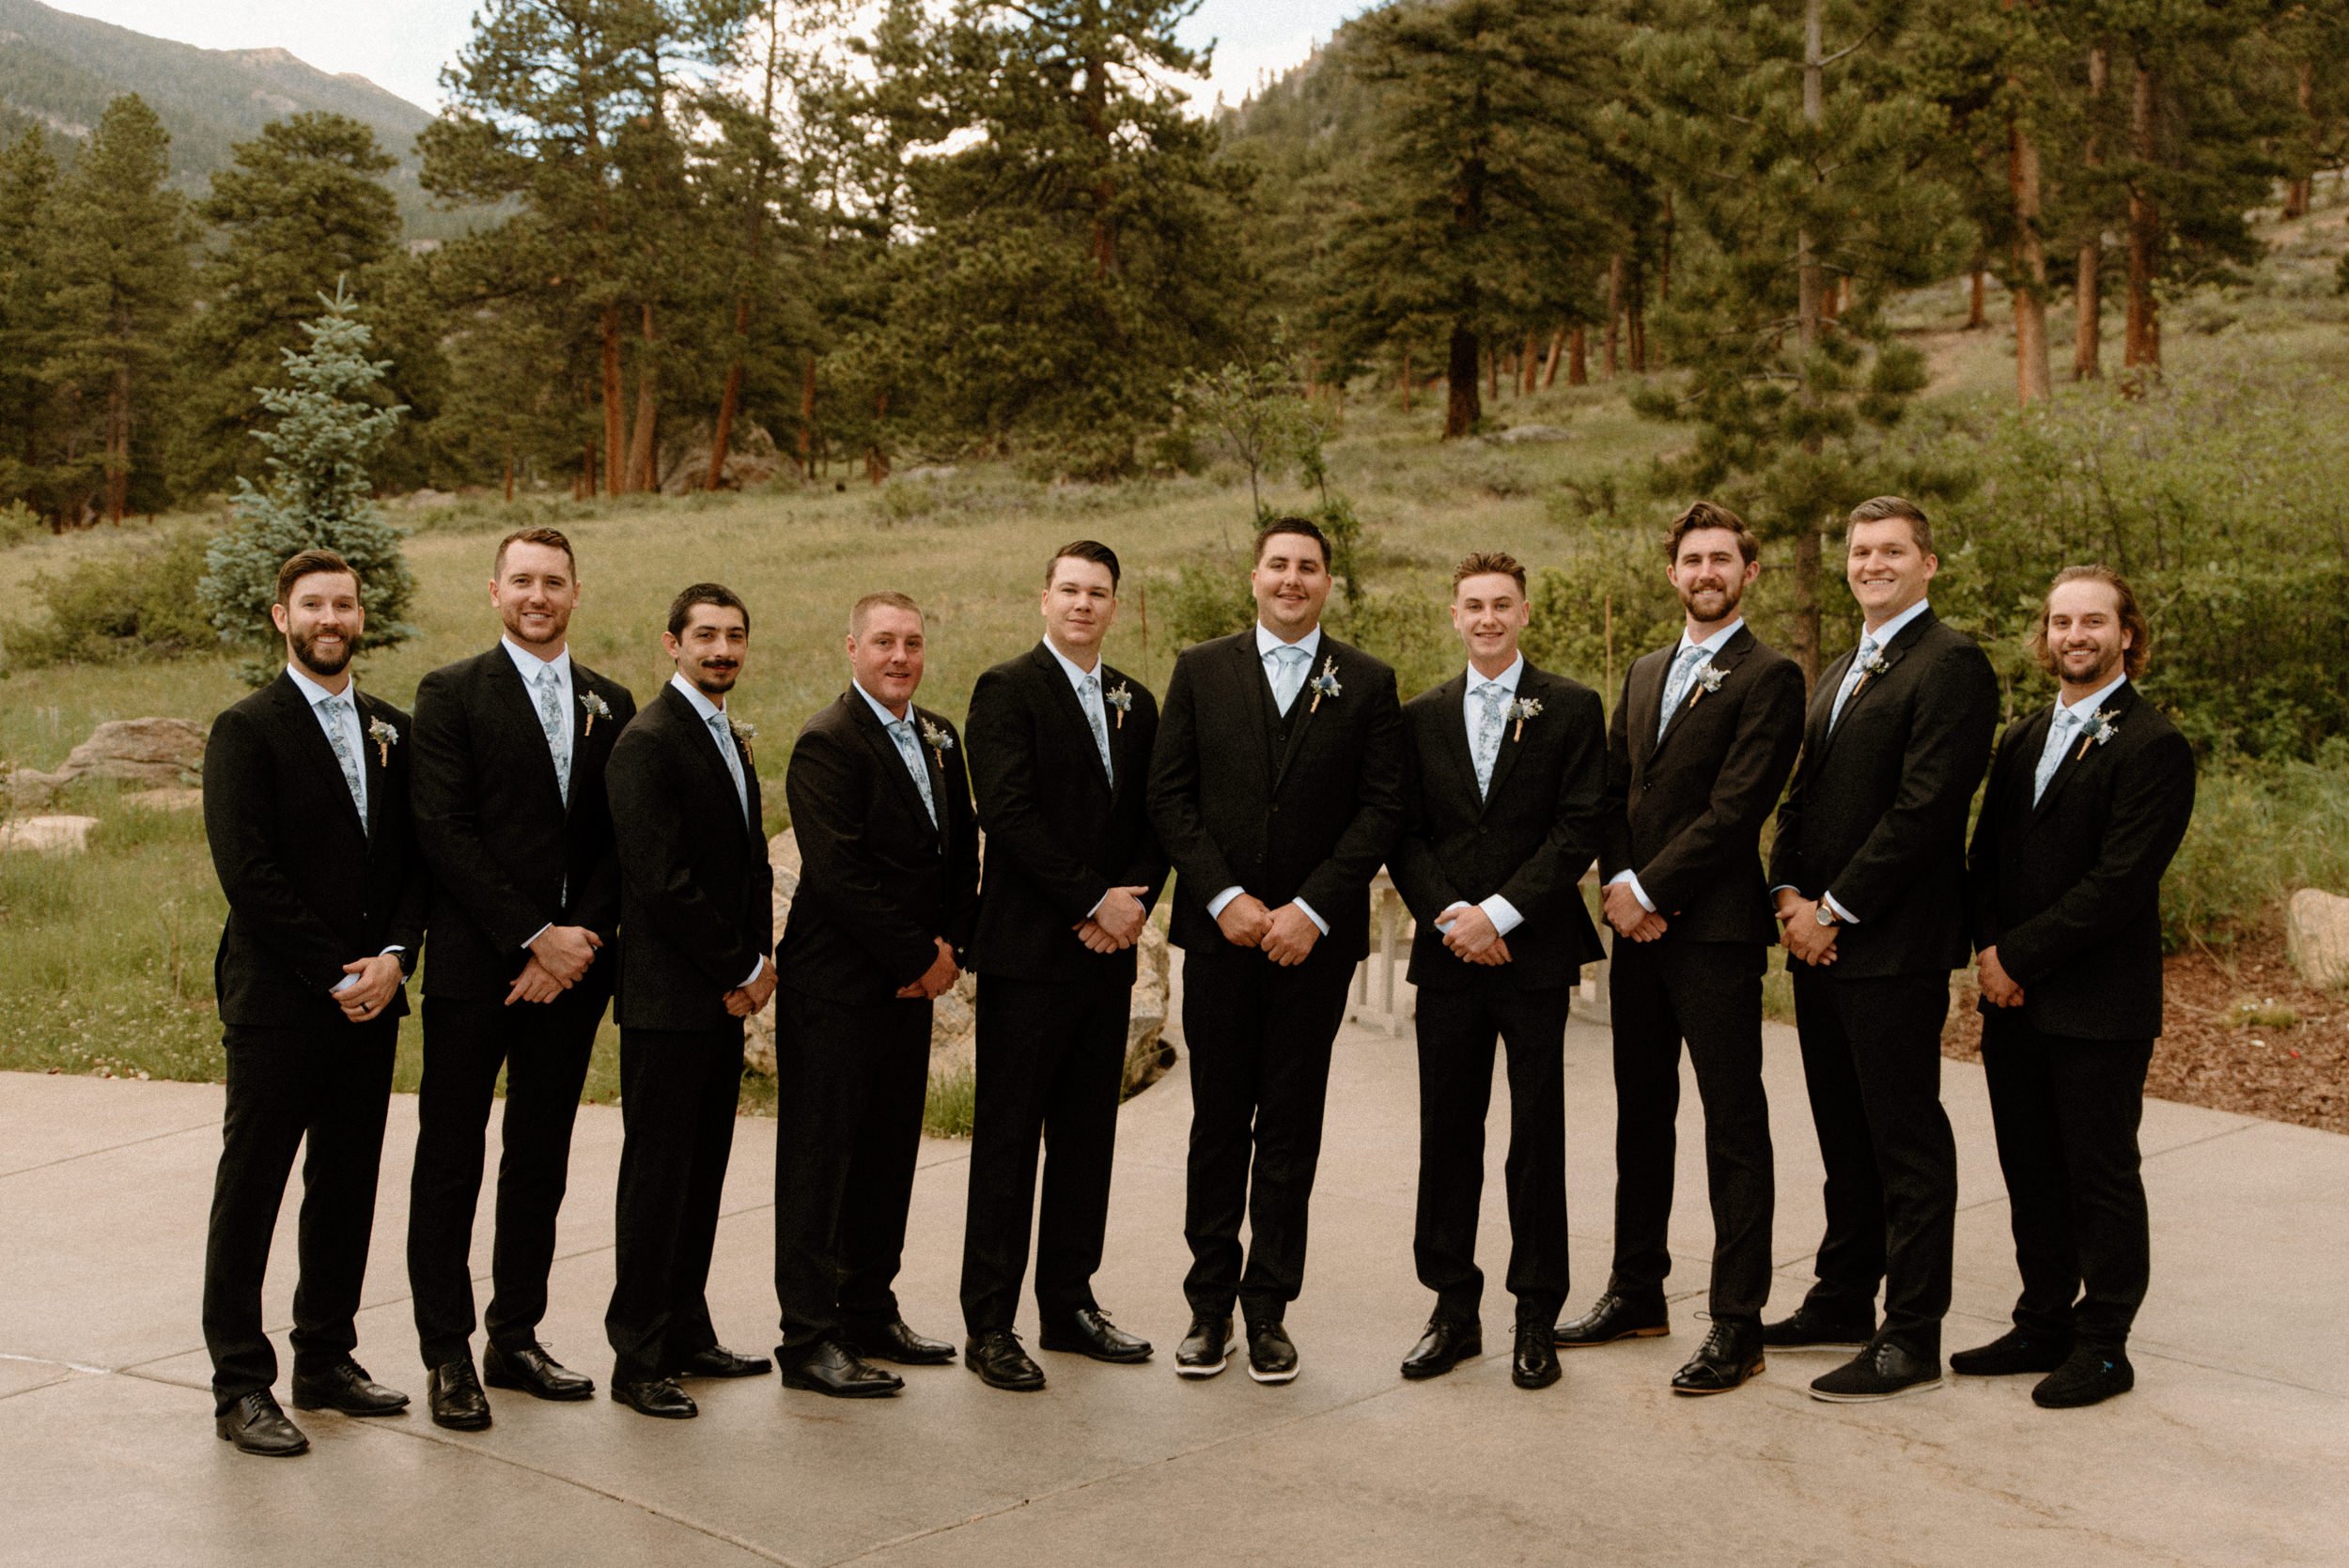 The groom poses with his groomsmen outside of the Della Terra Mountain Chateau in Estes Park, CO